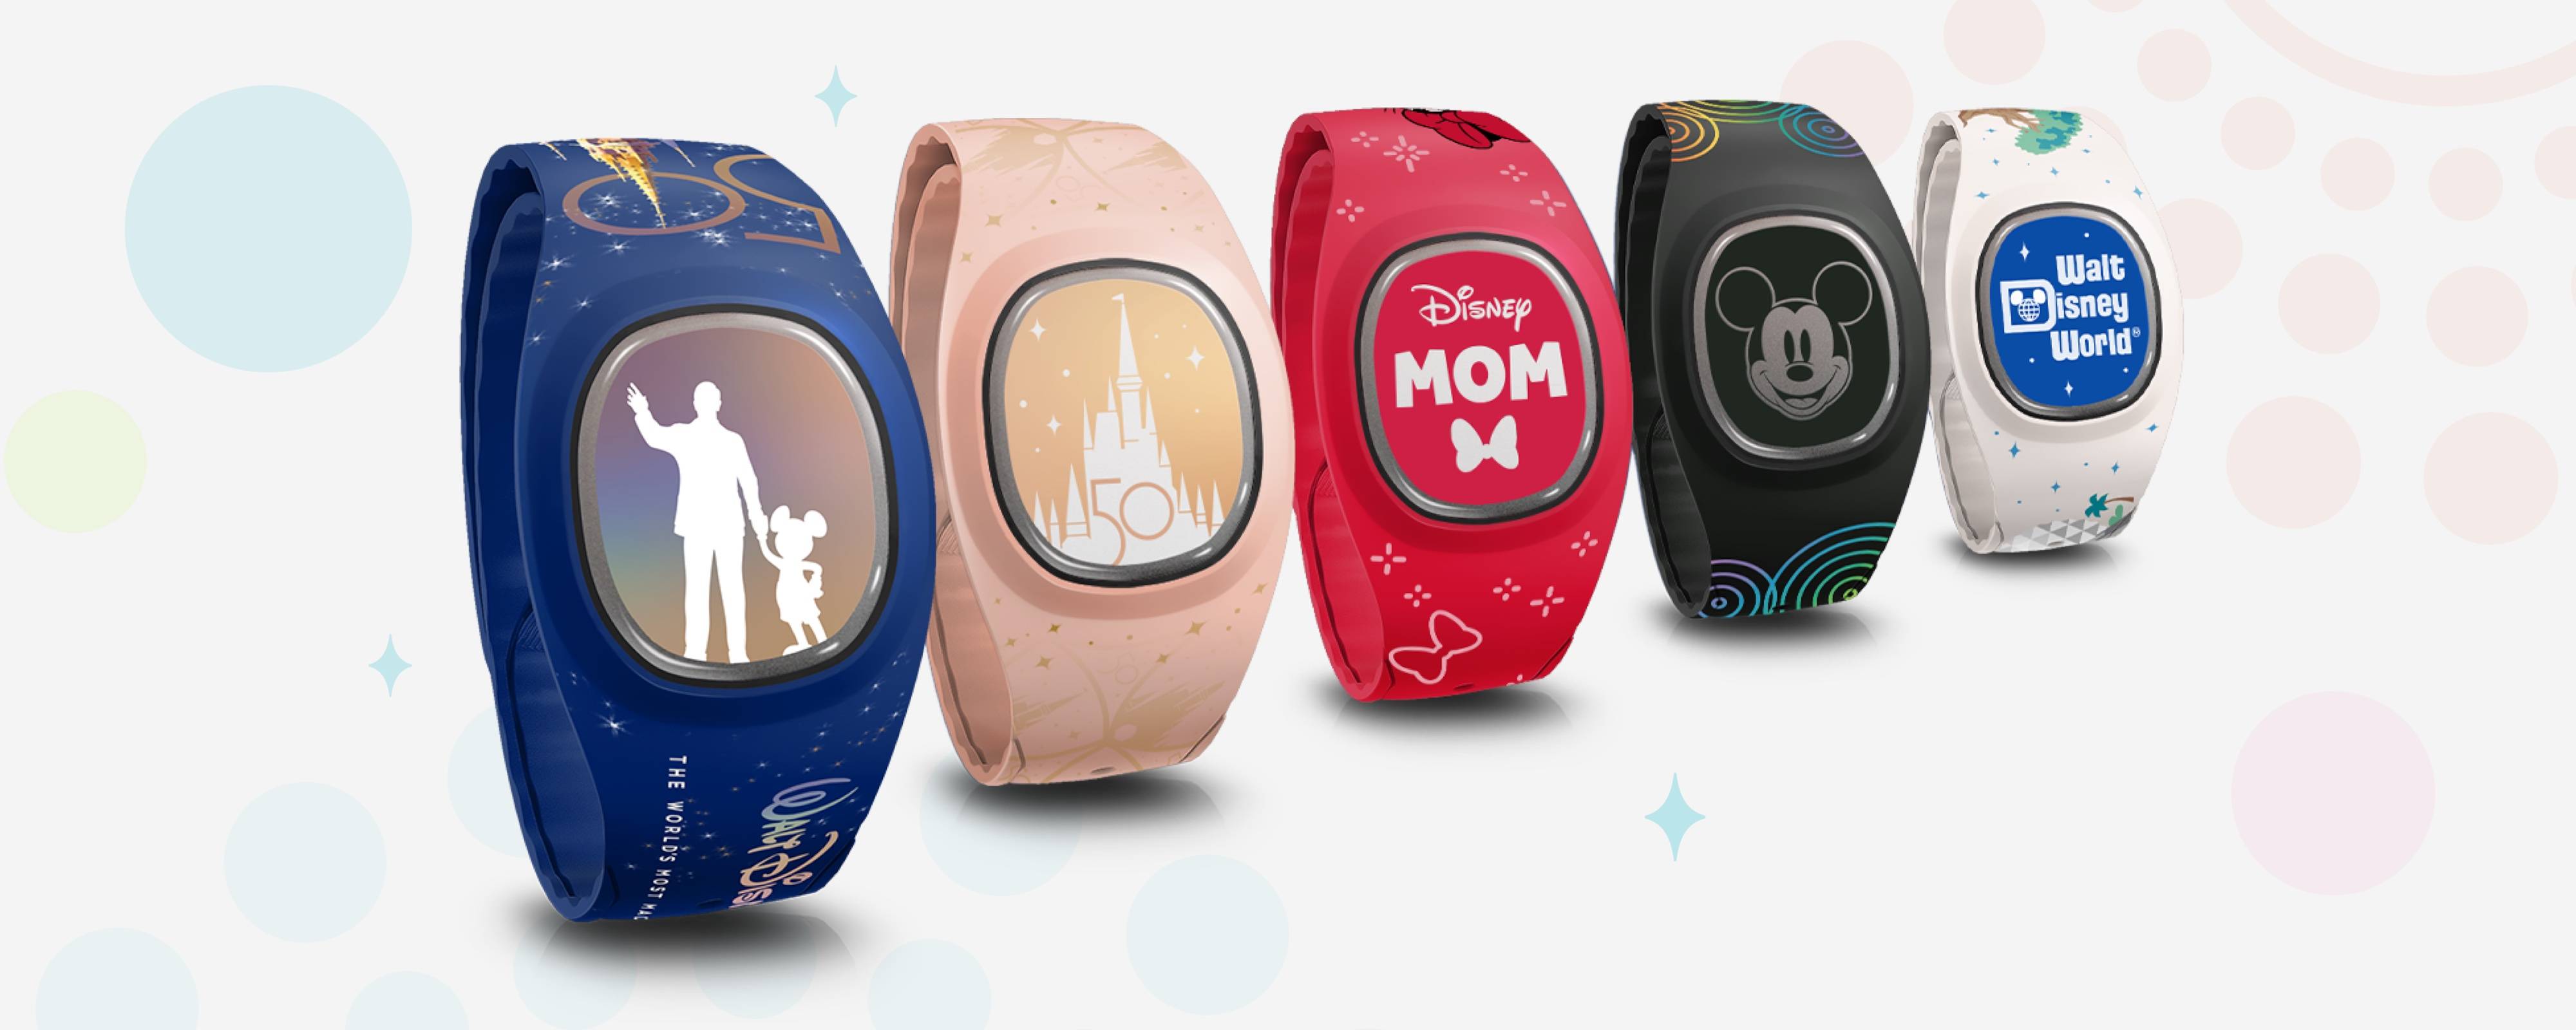 Do people still use Magicbands or does everybody just use their